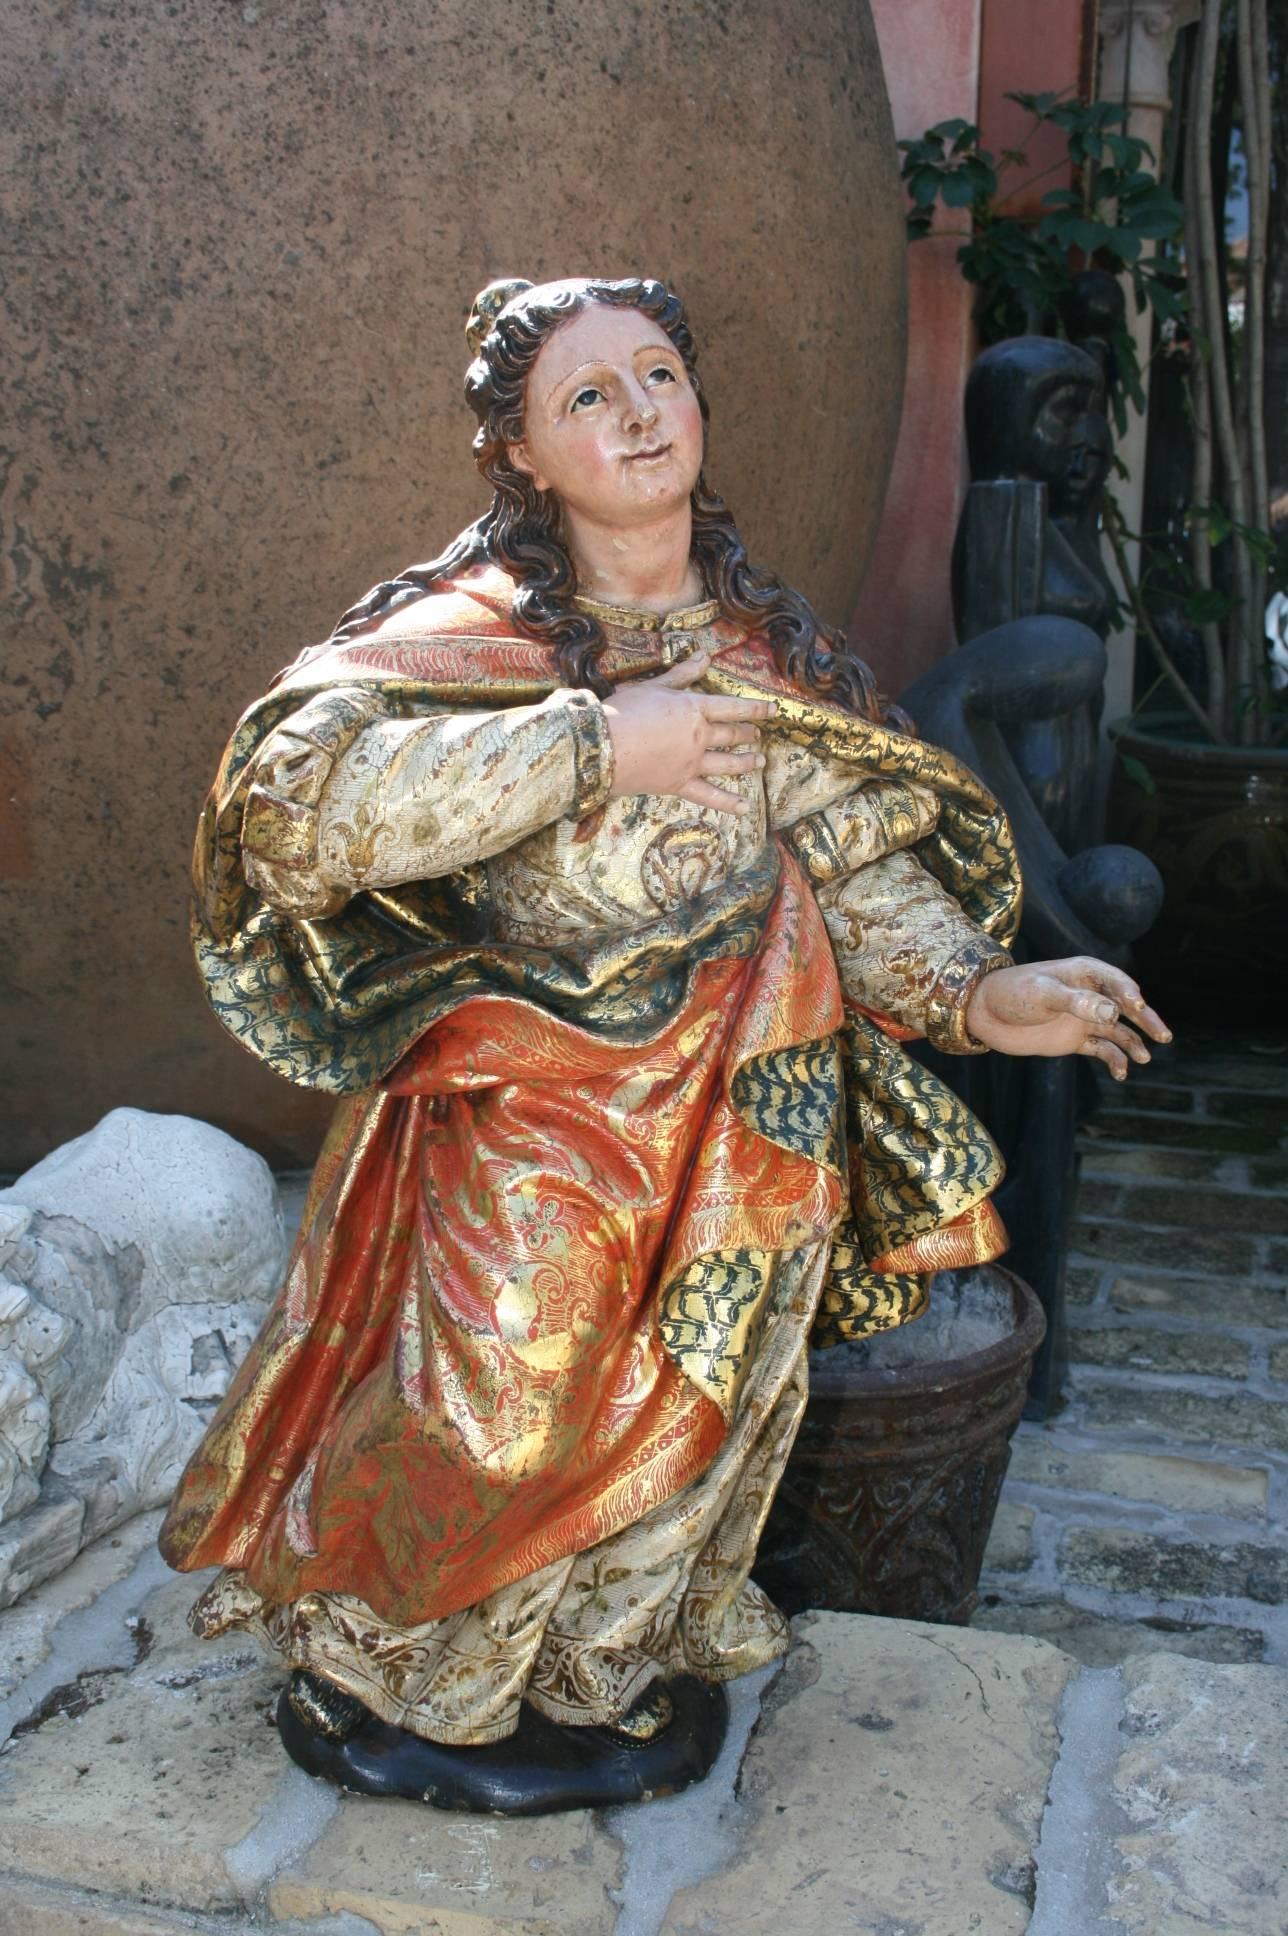 High-quality polychrome sculpture of the 17th century, from the Castilian area.

Magnificent state of conservation, great quality of carving and stew.
 